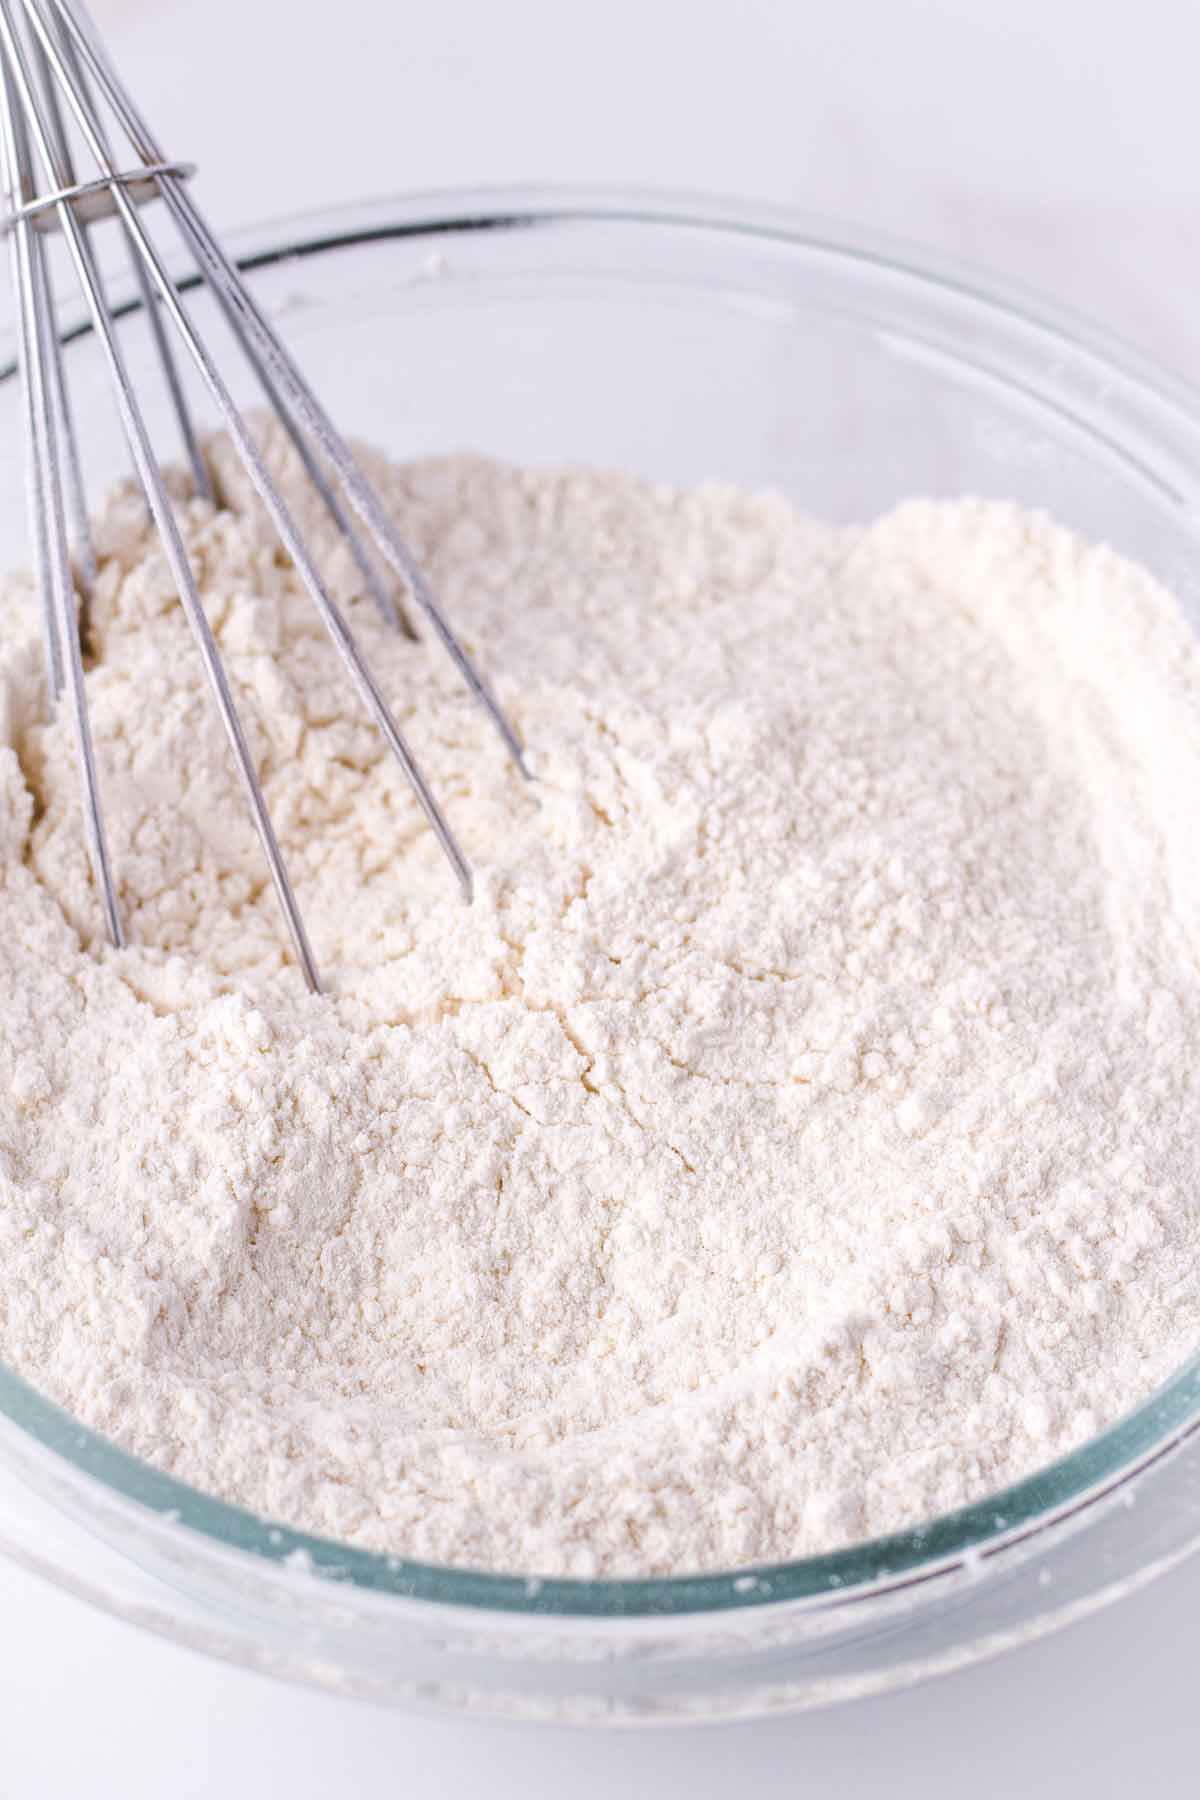 whisking dry ingredients in a mixing bowl